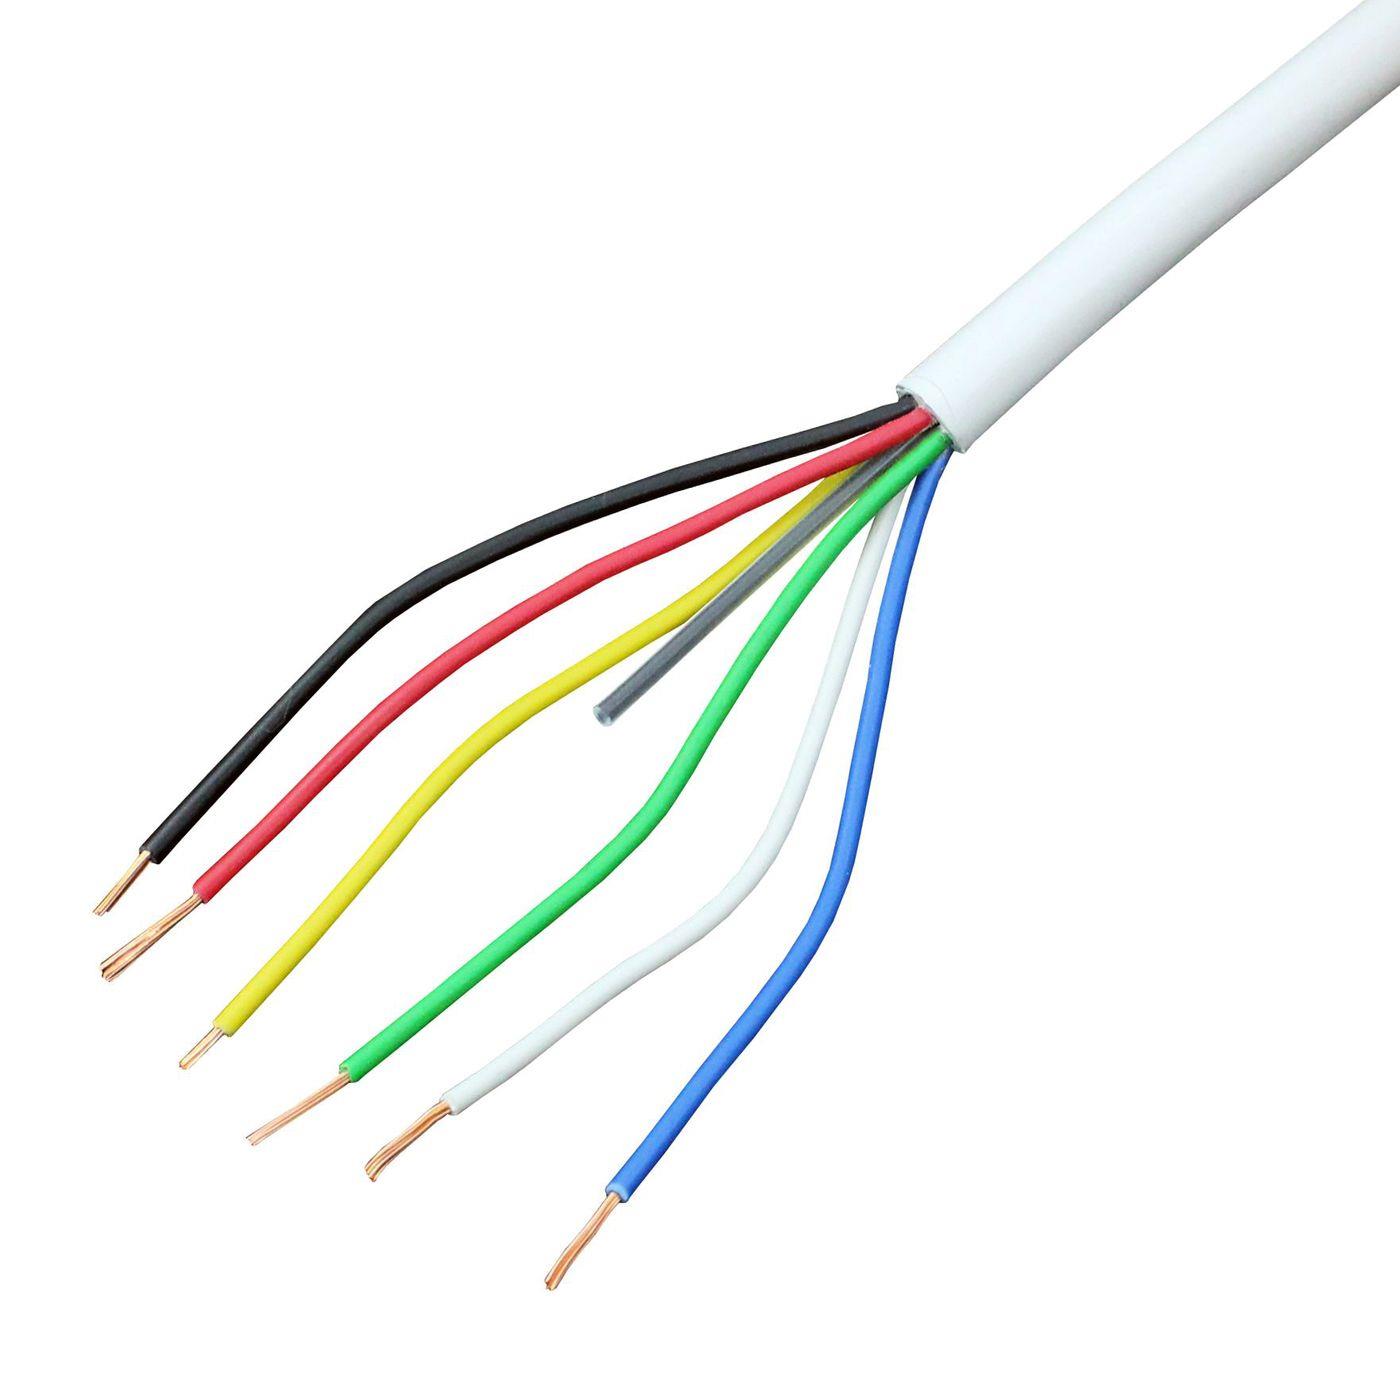 1m RGBW CCT LED Control cable 6x 0,34mm² LiYY Extension 6 wire Power cable white